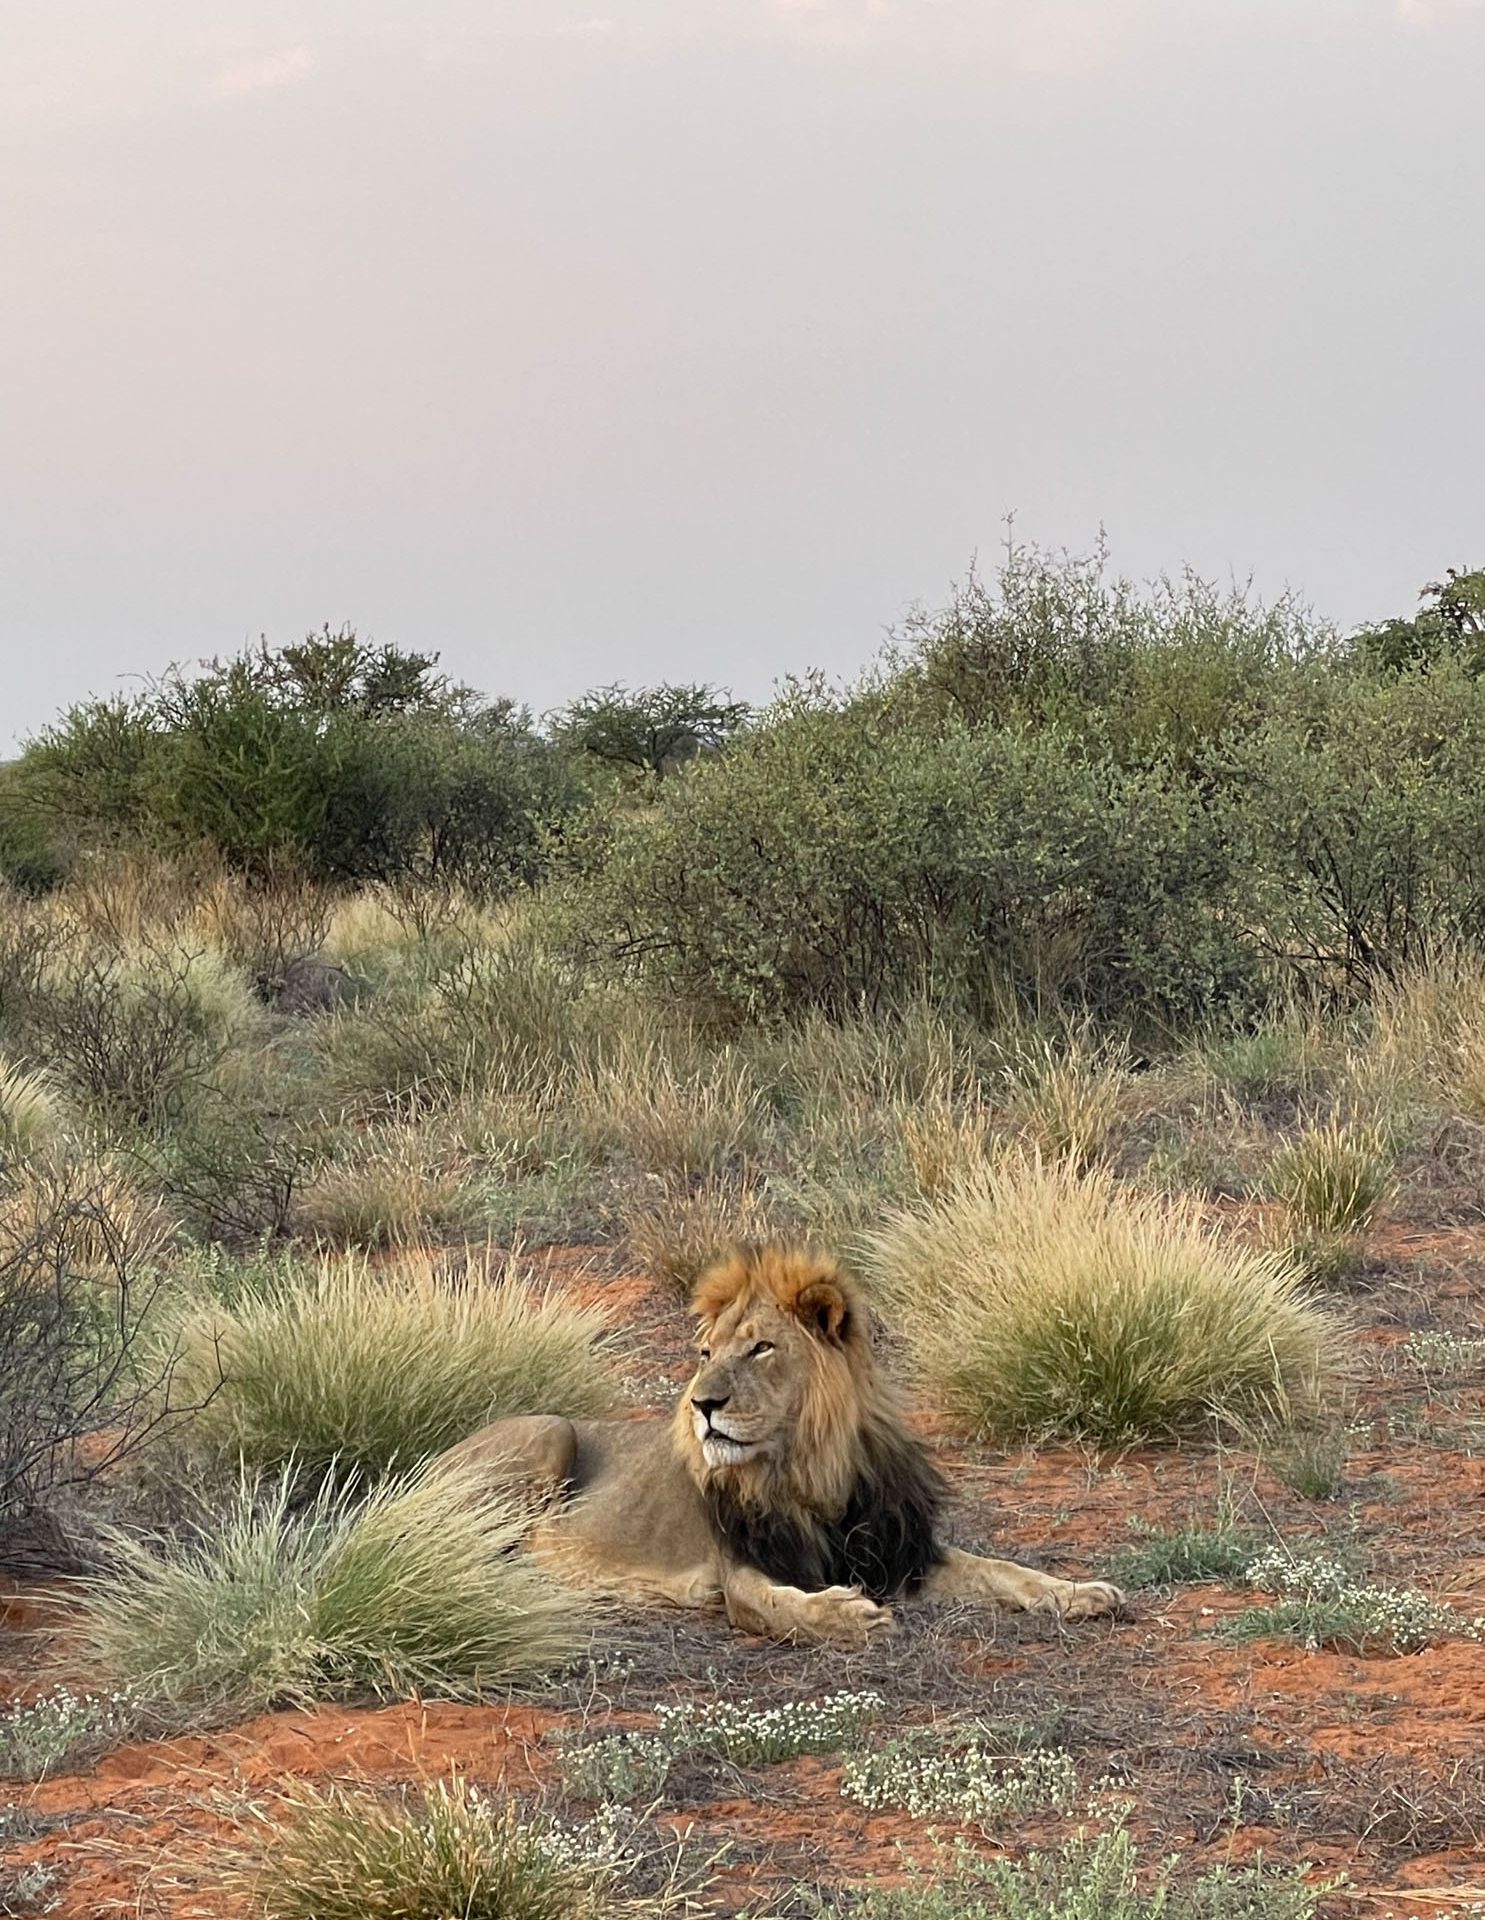 The black manes of the lions contrast beautifully with the red sand